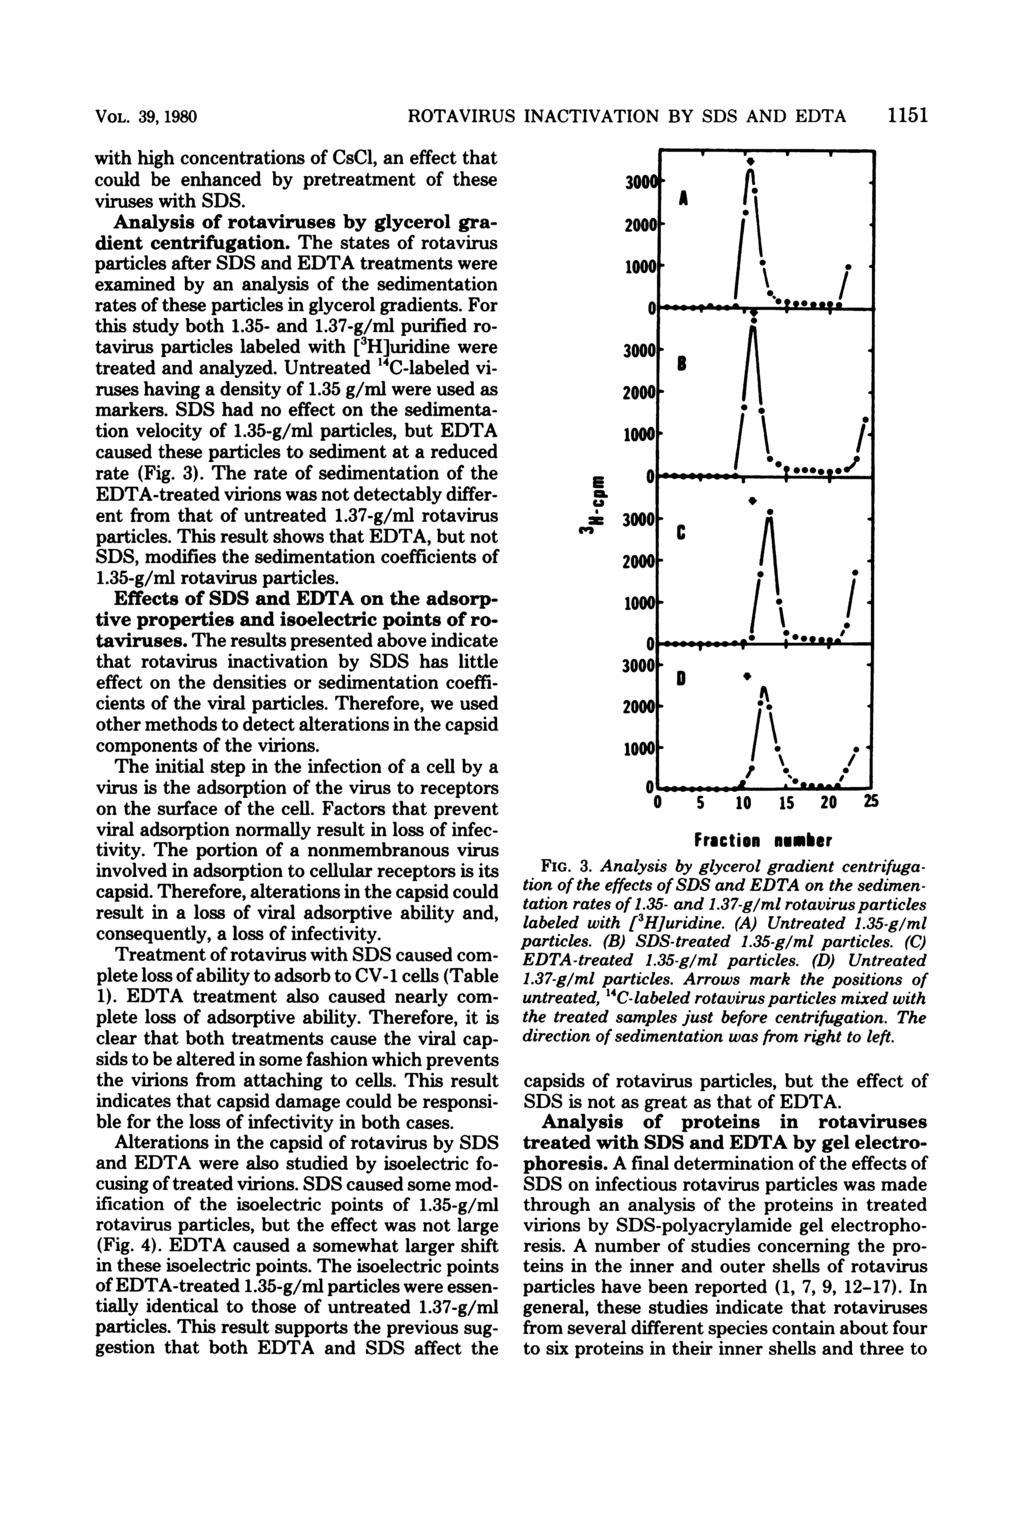 VOL. 39, 1980 with high concentrations of CsCl, an effect that could be enhanced by pretreatment of these viruses with SDS. Analysis of rotaviruses by glycerol gradient centrifugation.